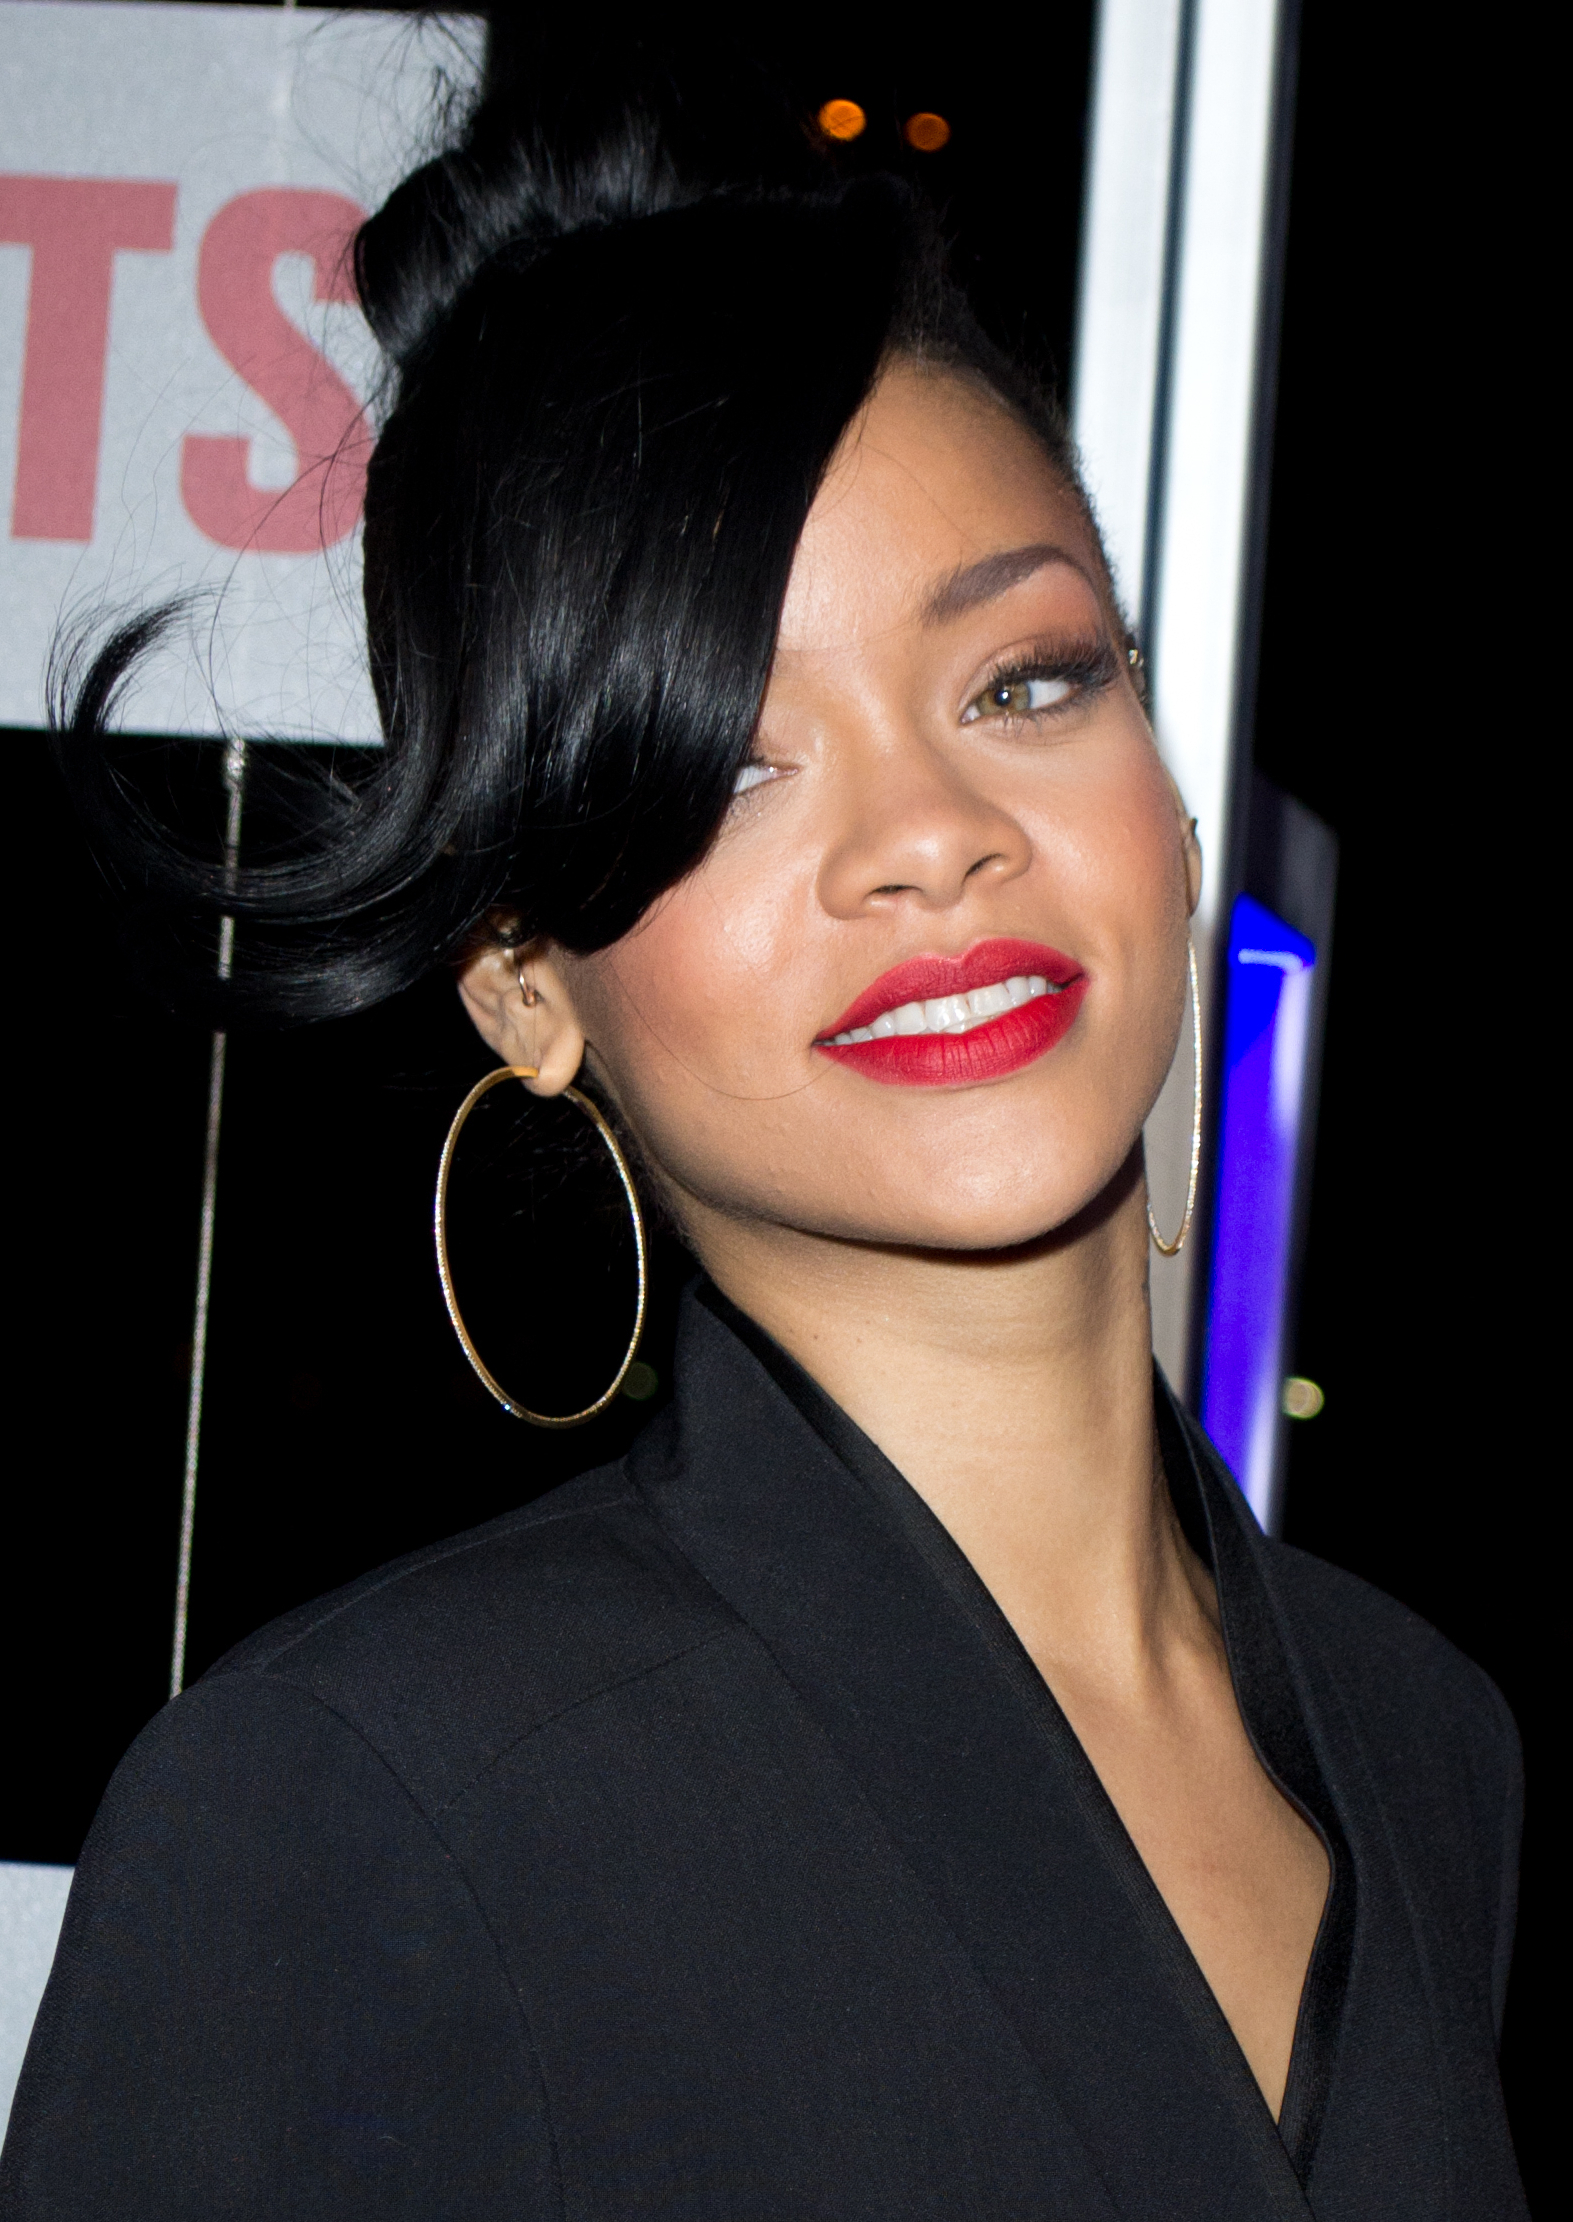 Peoples' News Roundup: Rihanna stages fashion show for exclusive Amazon release